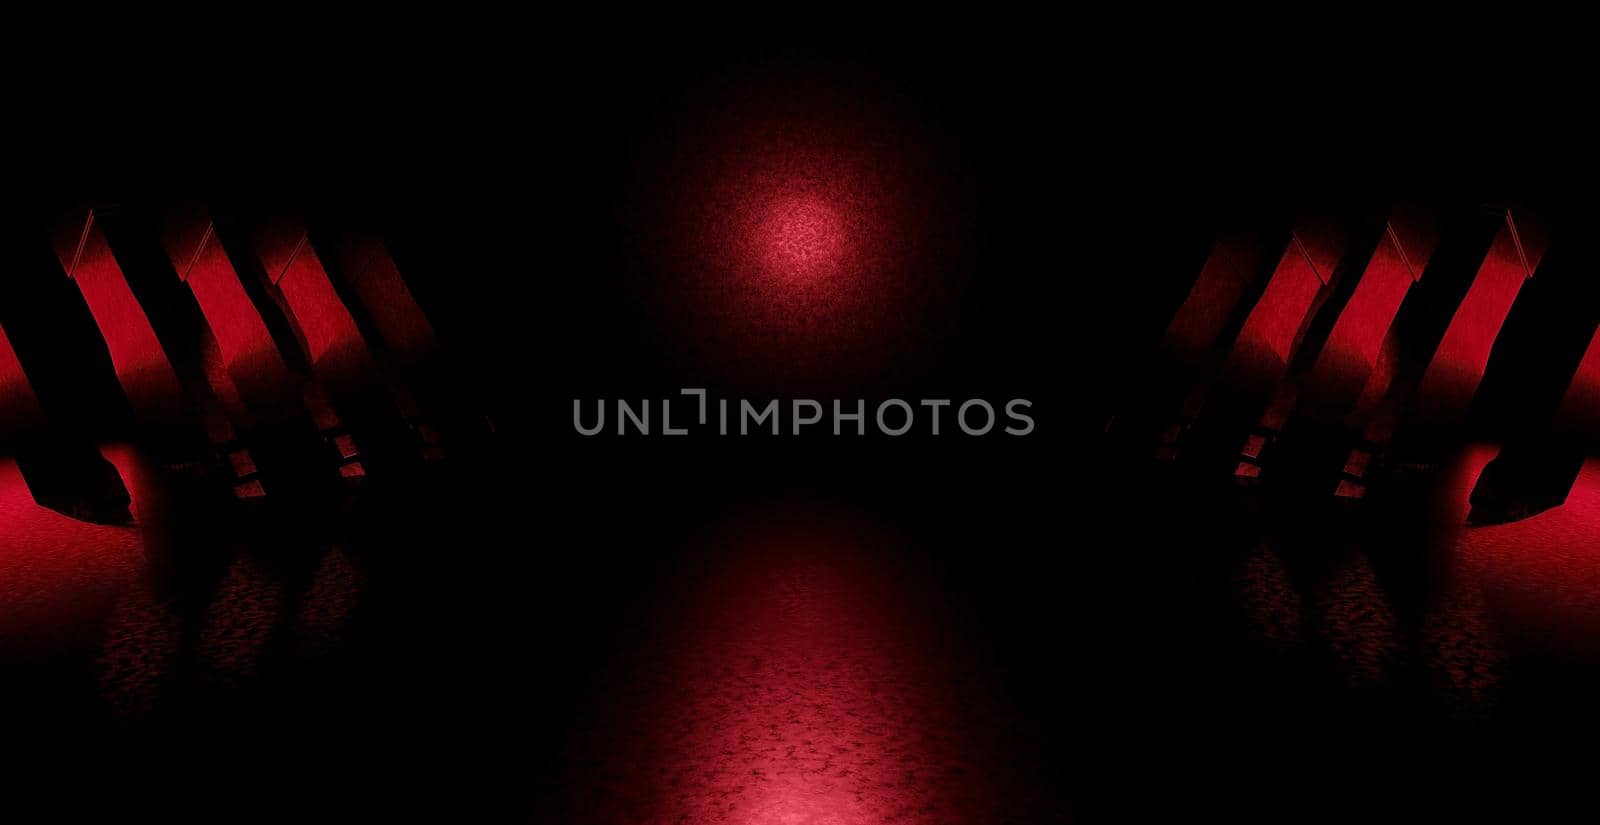 OuterSpace Reflective Studio Room Black Background Space Age Concept For Showroom Studio Montage 3D Illustration